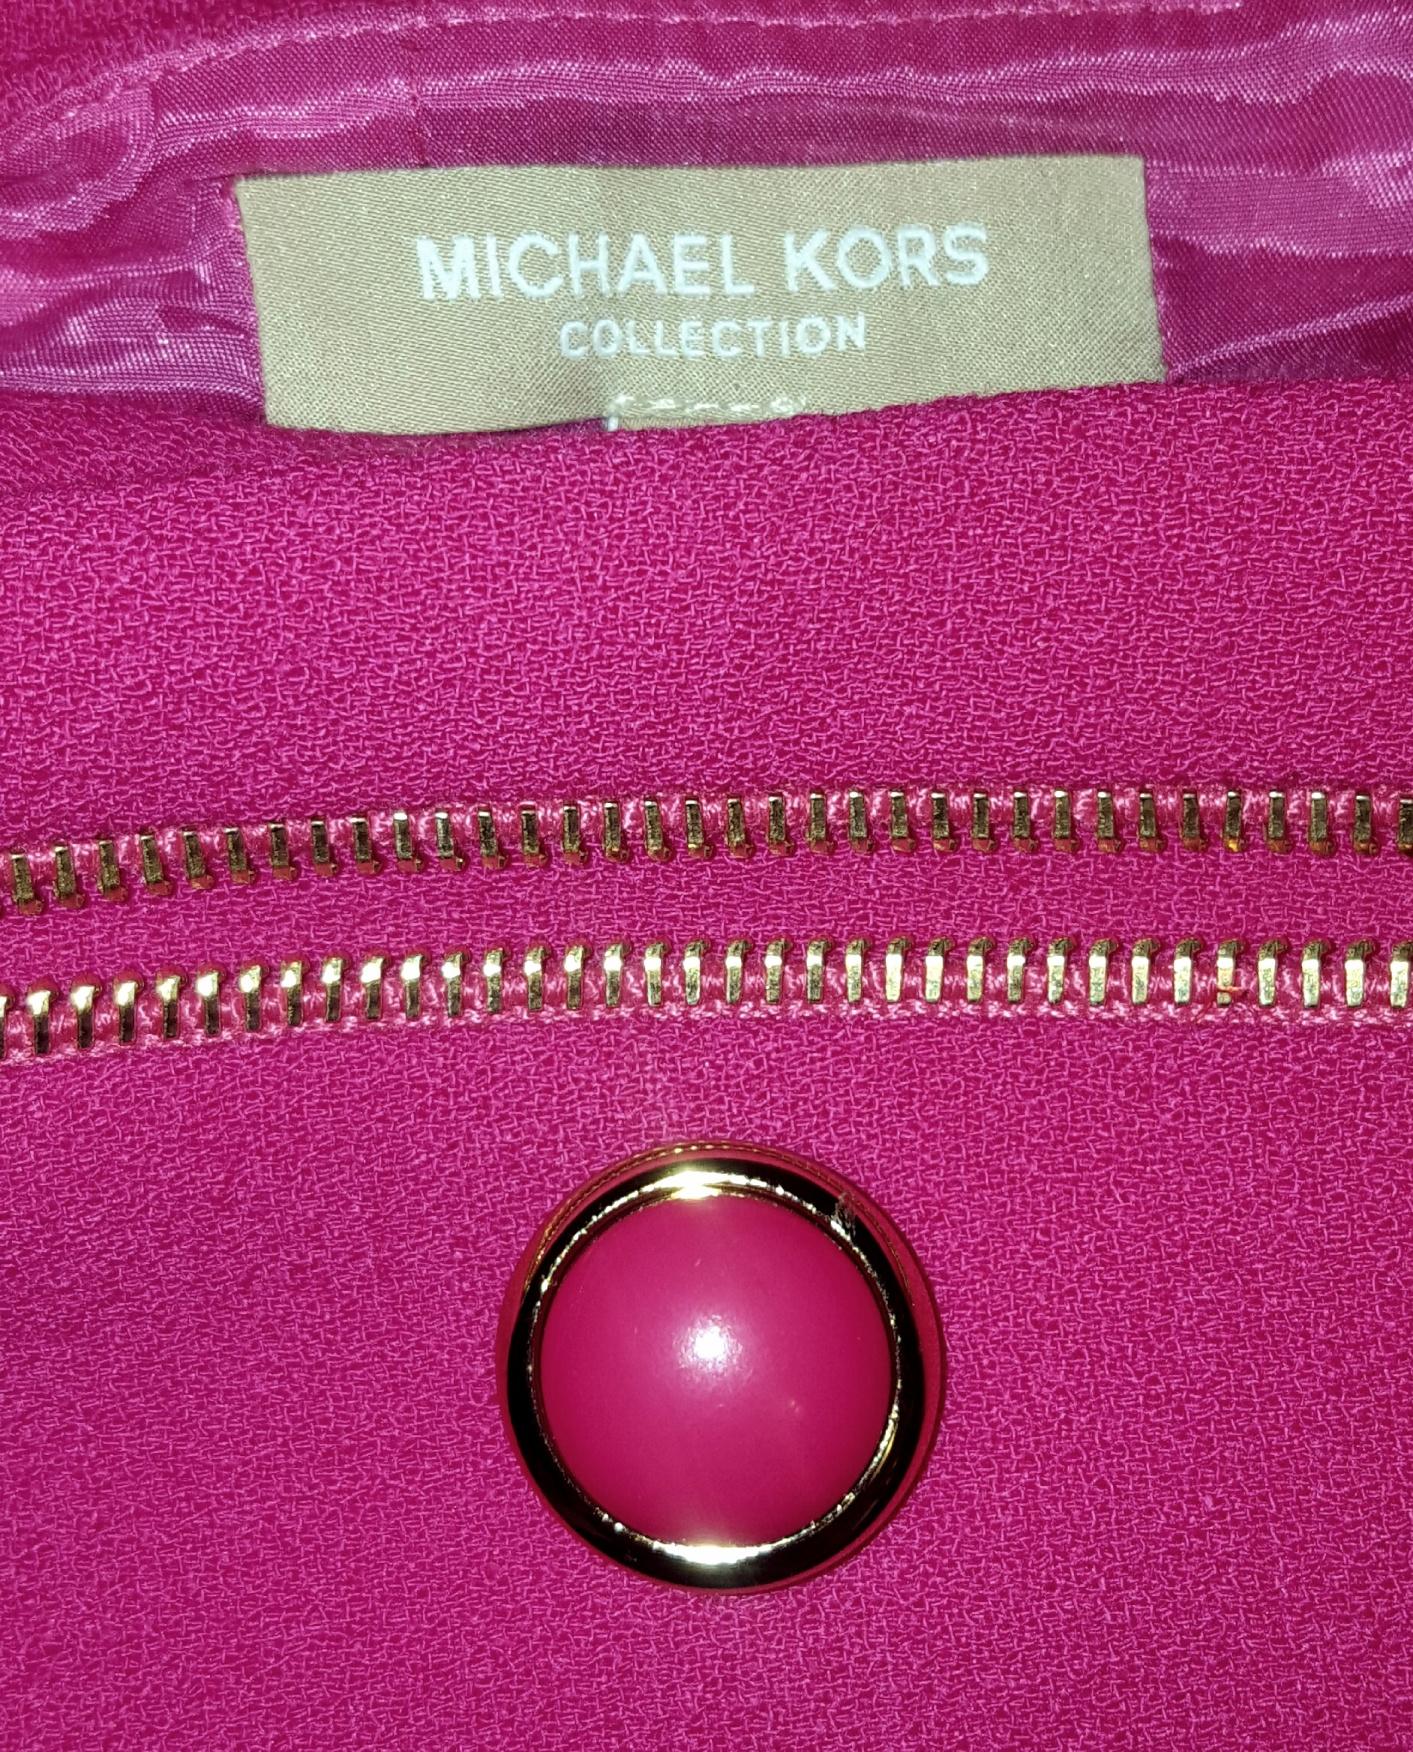 Michael Kors Fuschia Dress With Gold Tone Zipper Pockets In Excellent Condition For Sale In Palm Beach, FL